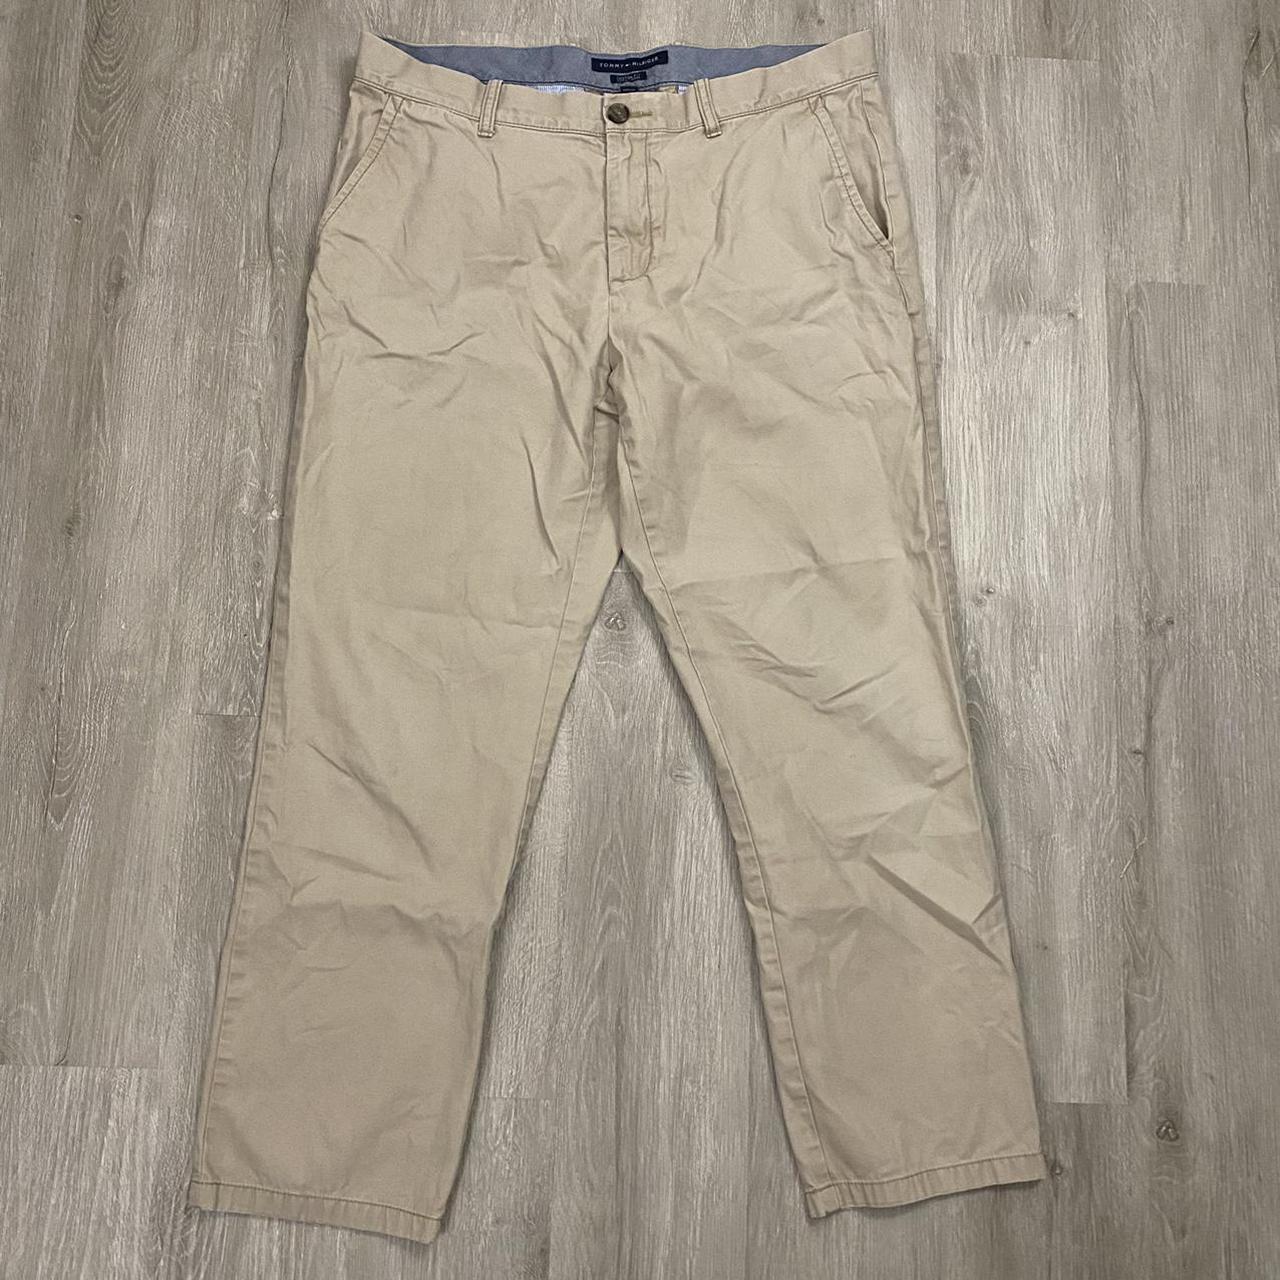 Product Image 3 - Vintage Tommy Hilfiger pants 36x30
In